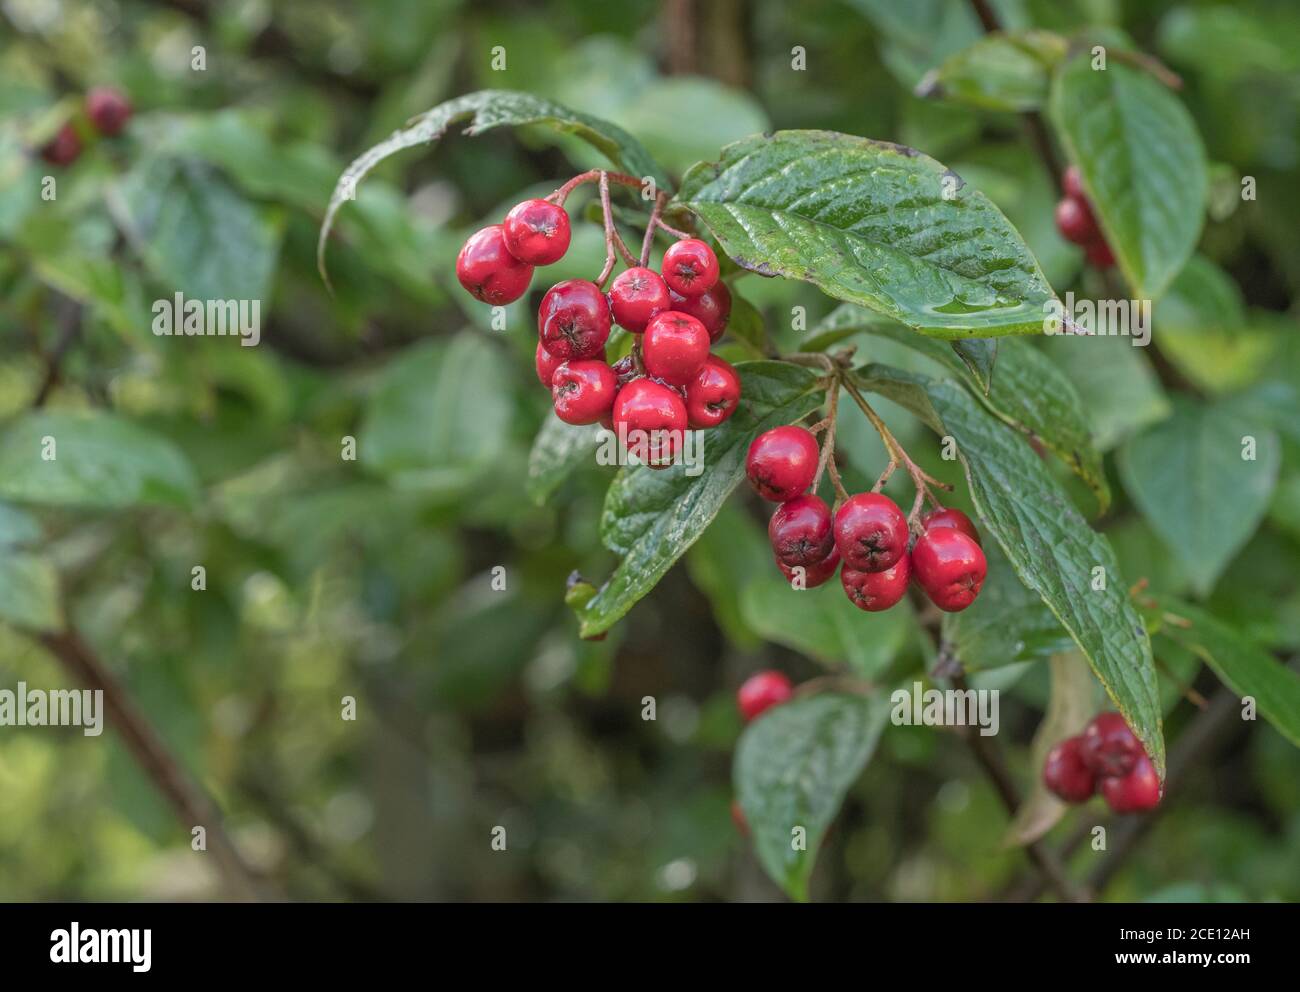 Cotatoneaster berries and leaves in hedgerow. Unsure which variety. Could be Cotoneaster franchetti, C. simonsii or other. Leaves quite large. Stock Photo